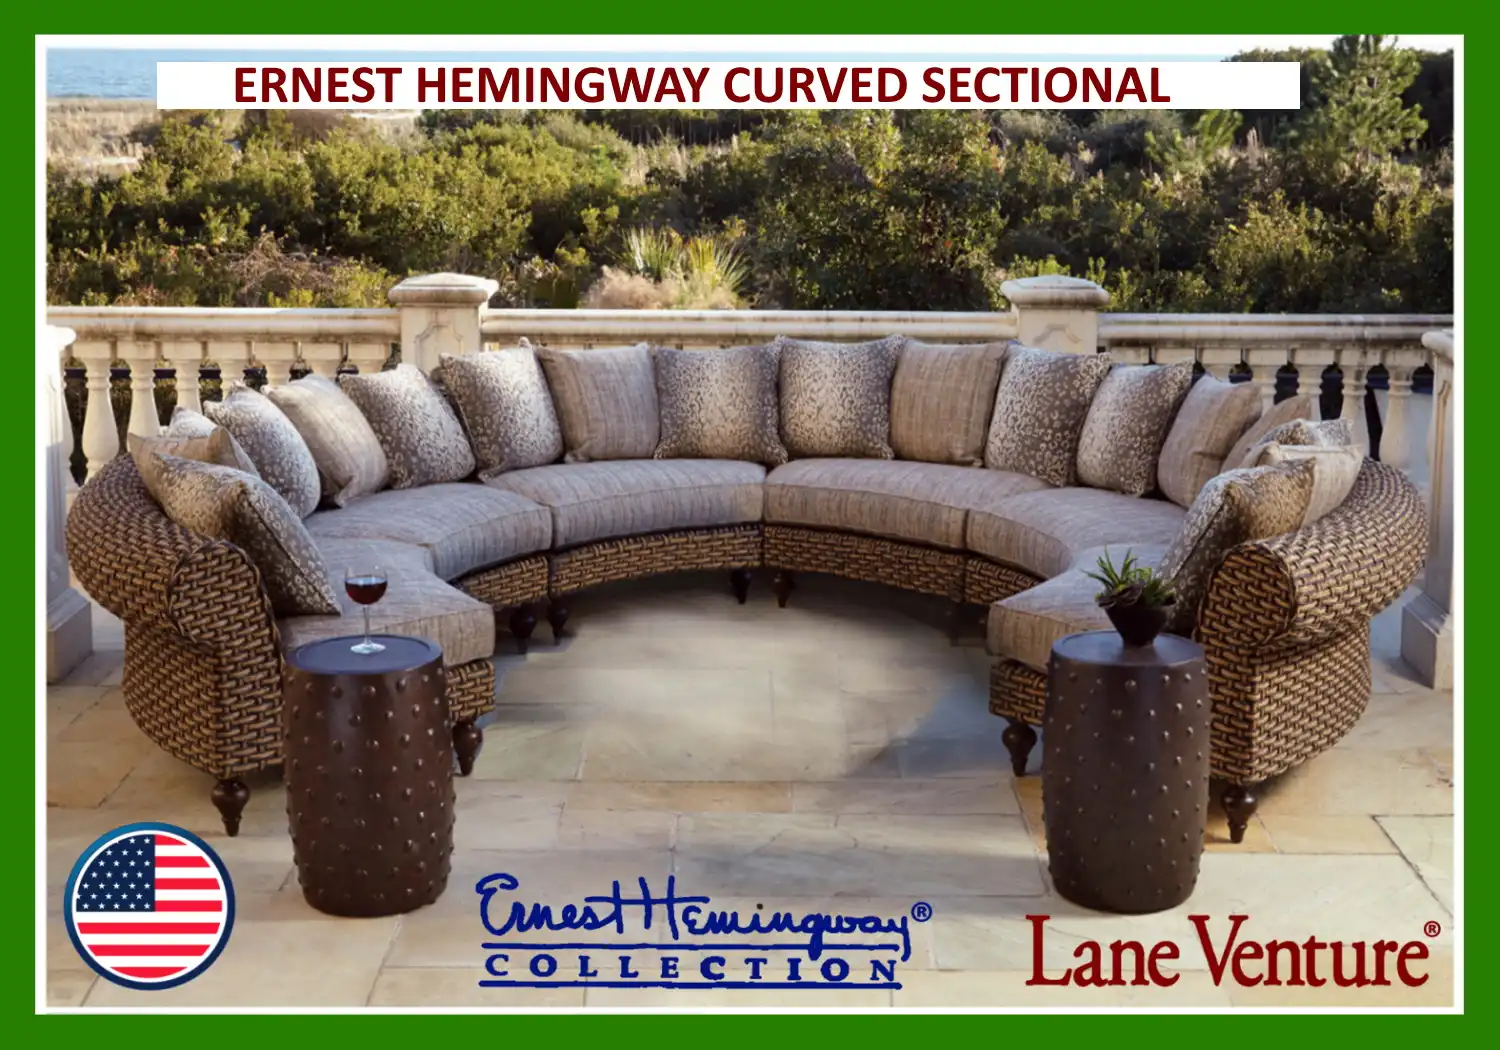 ERNEST HEMINGWAY CURVED SECTIONAL